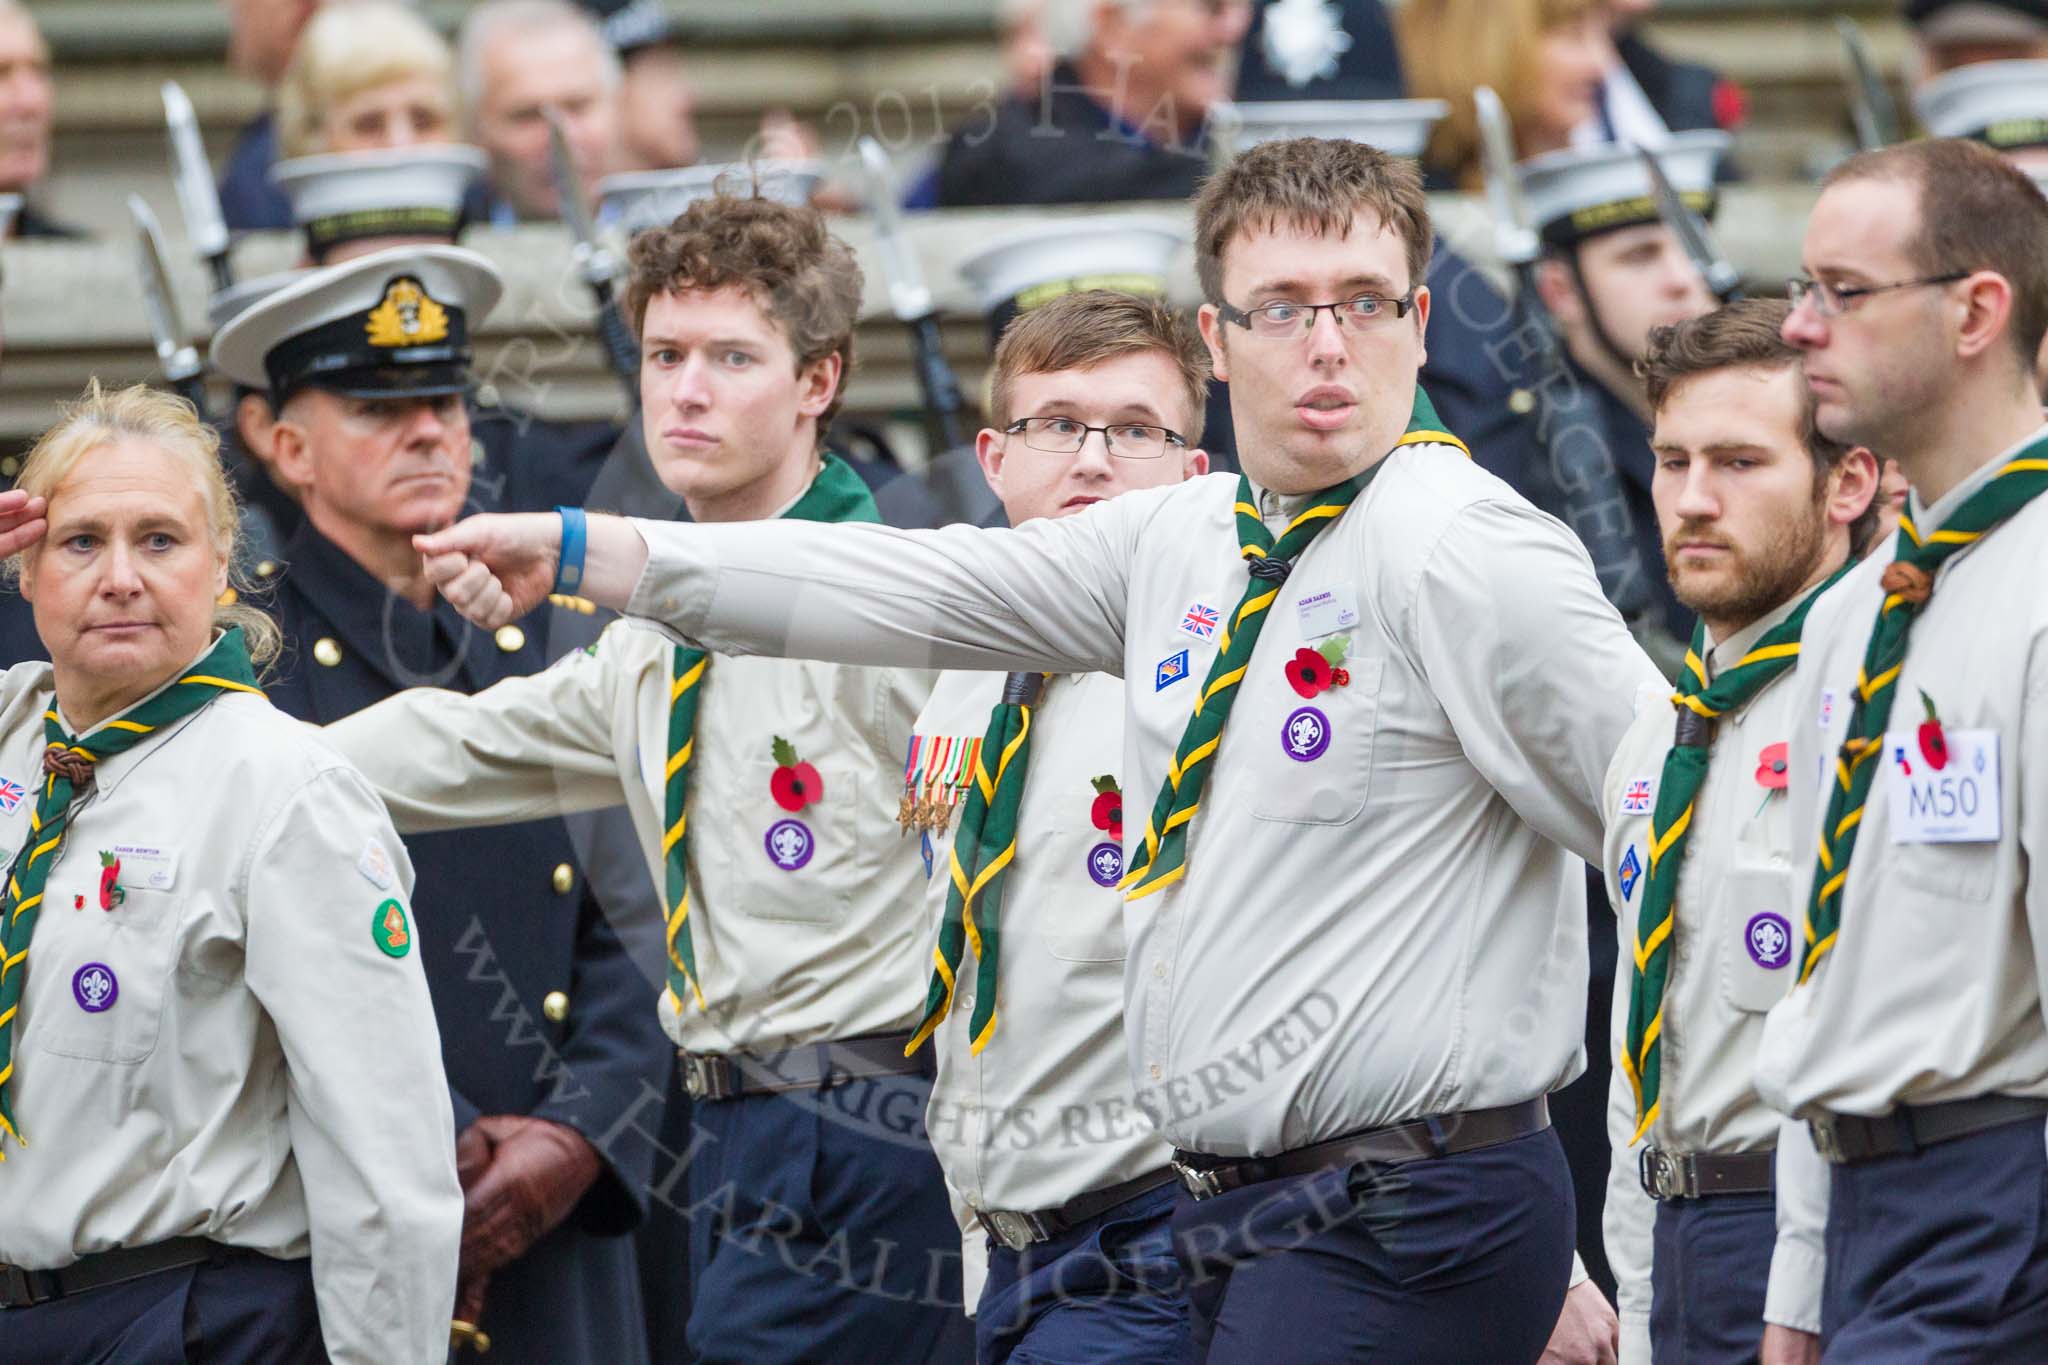 Remembrance Sunday at the Cenotaph 2015: Group M50, Scout Association.
Cenotaph, Whitehall, London SW1,
London,
Greater London,
United Kingdom,
on 08 November 2015 at 12:20, image #1720